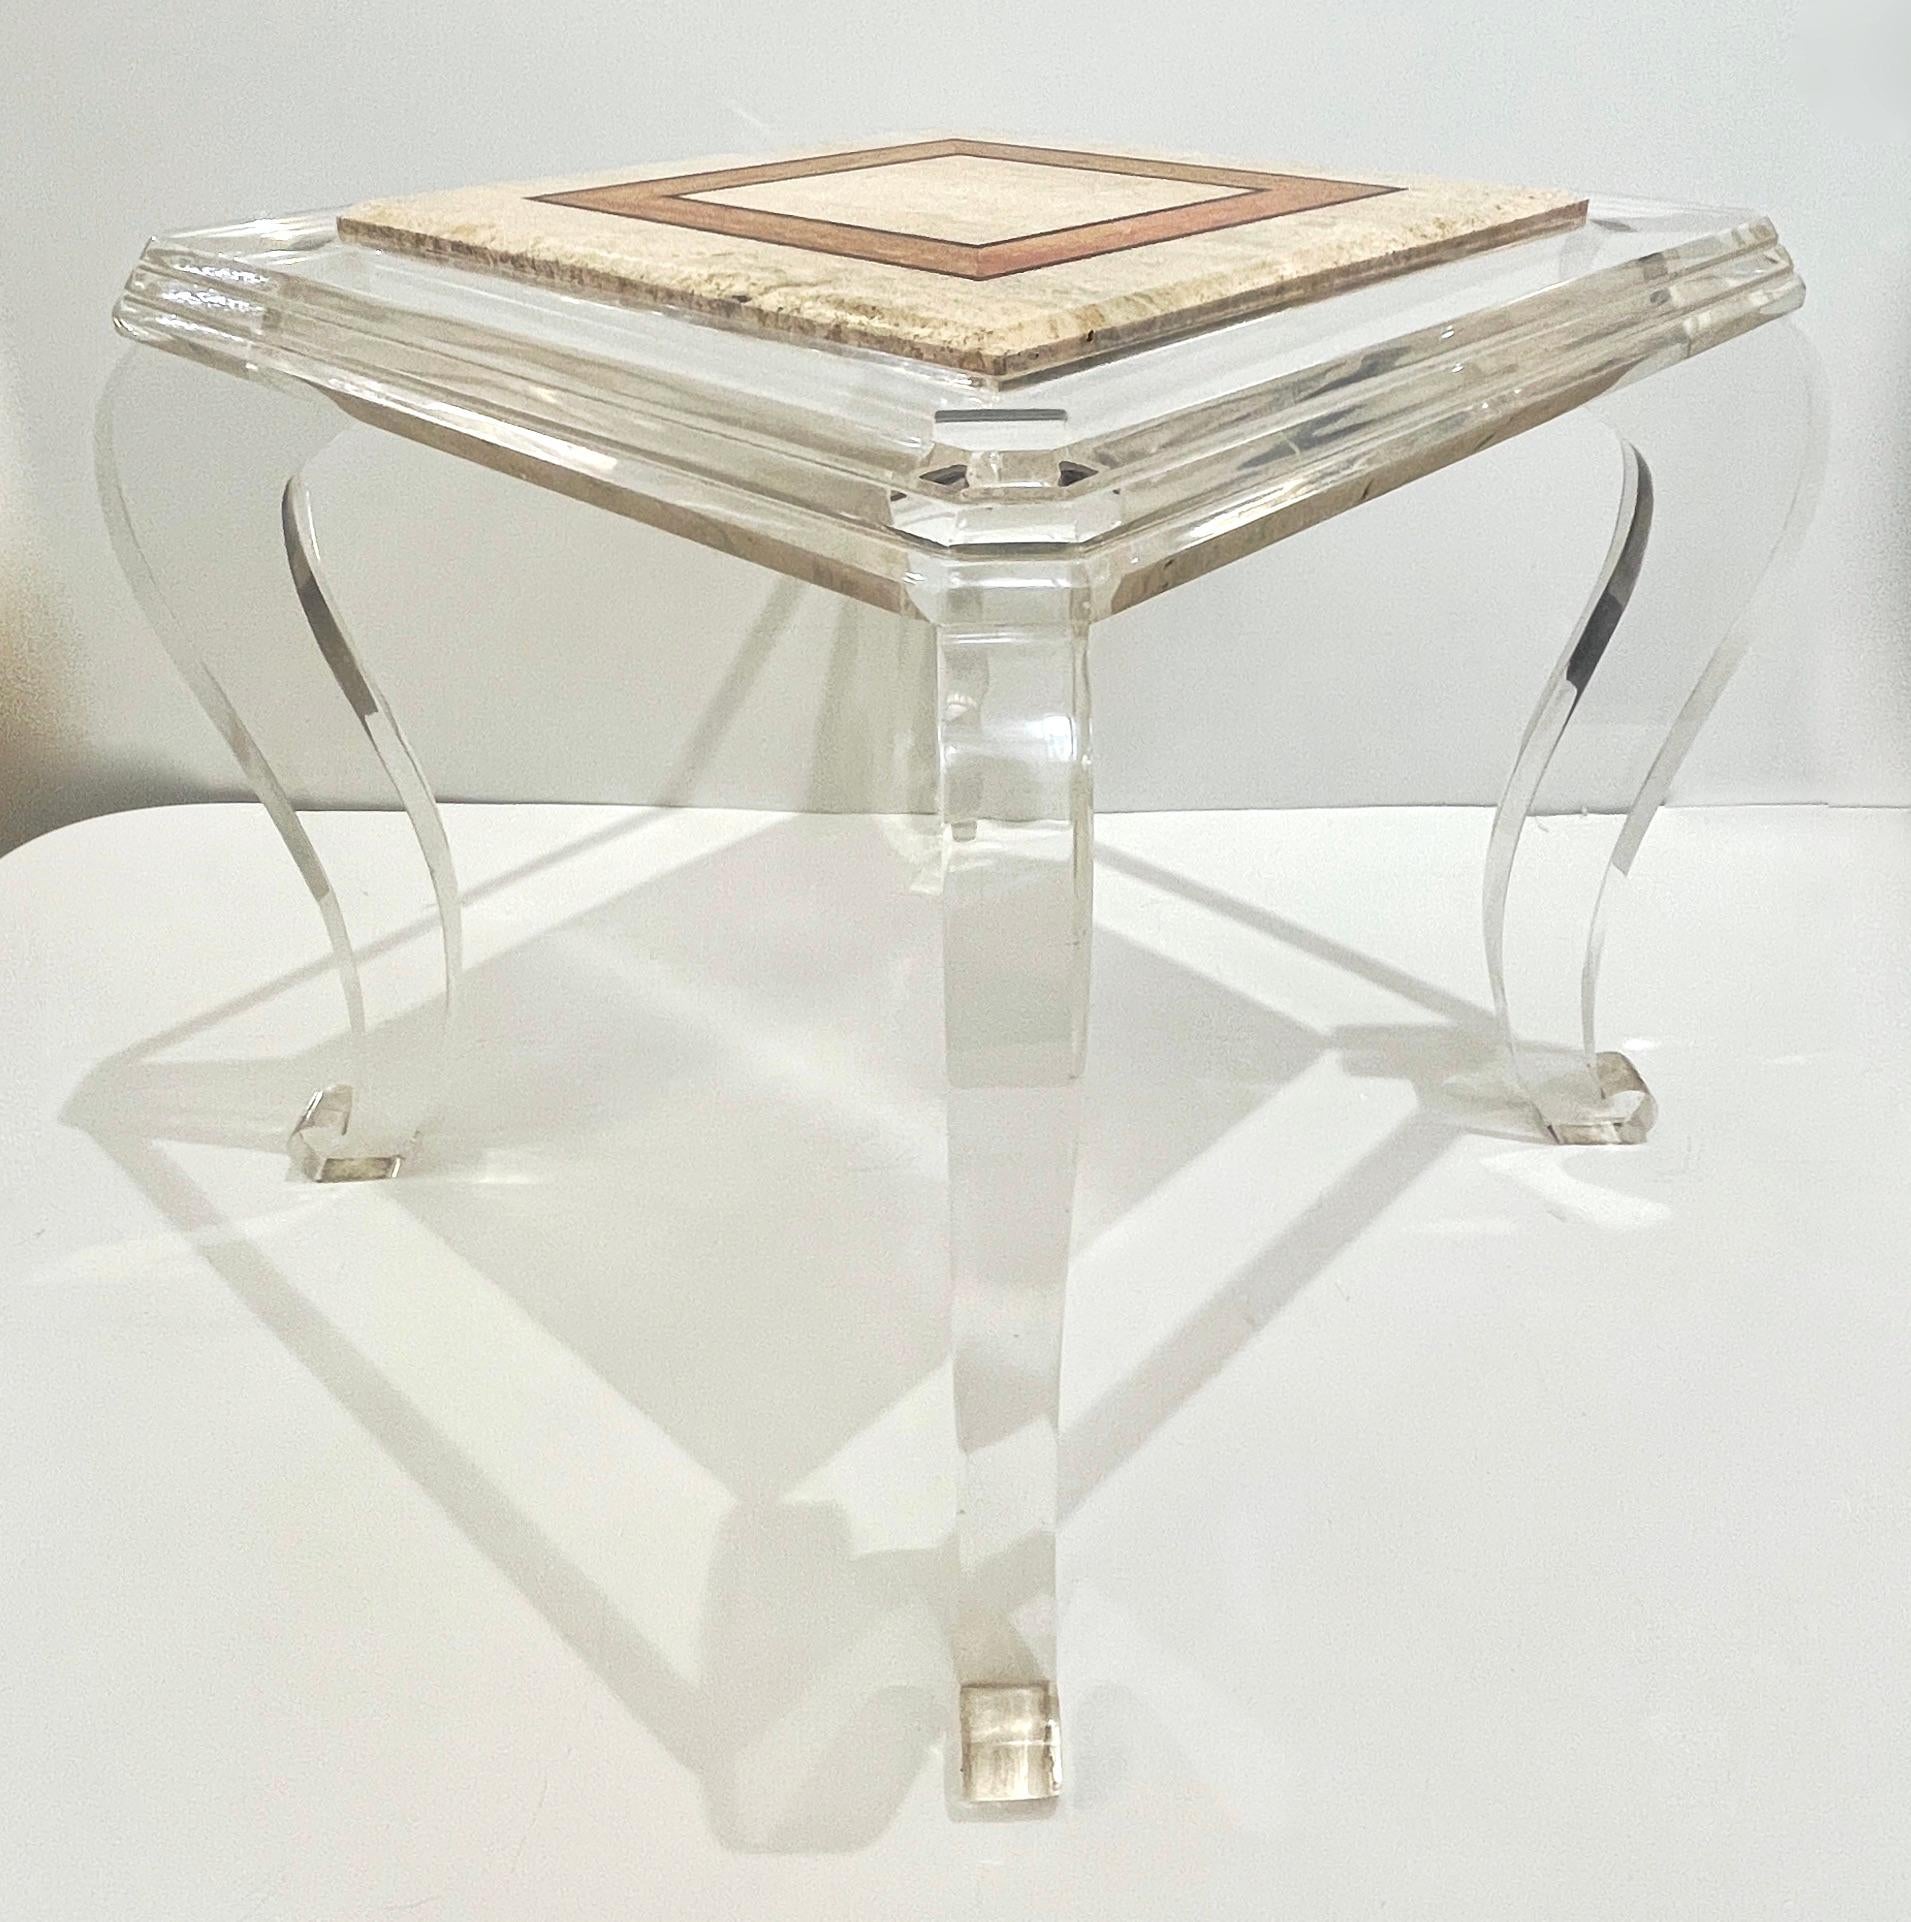 1978 rare pair of Italian cocktail tables (they can also be purchased individually) by the company Roman Deco (from Rome), an exceptionally unique design and very innovative: beauty with a touch of color combined with high-quality manufacturing and